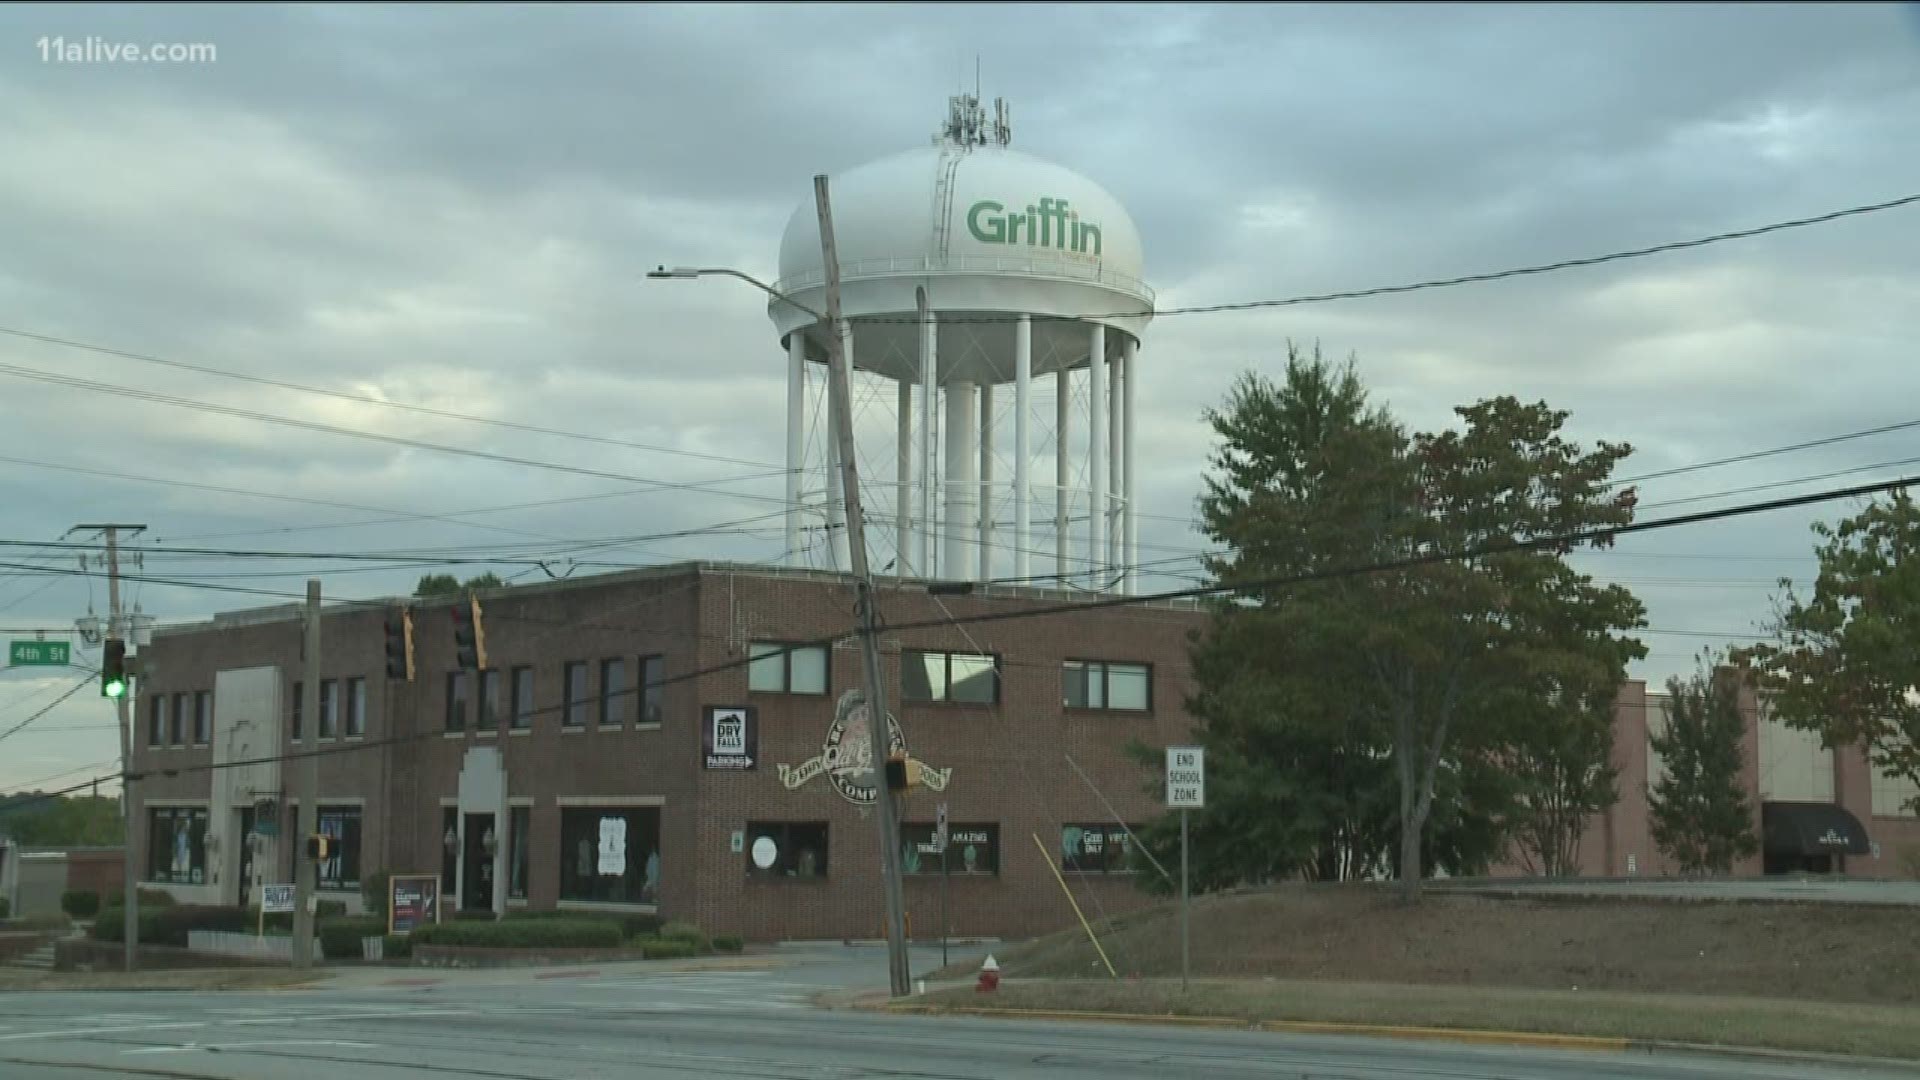 A lack of rain has placed the city in a severe drought condition. And that has city officials in Griffin worried.